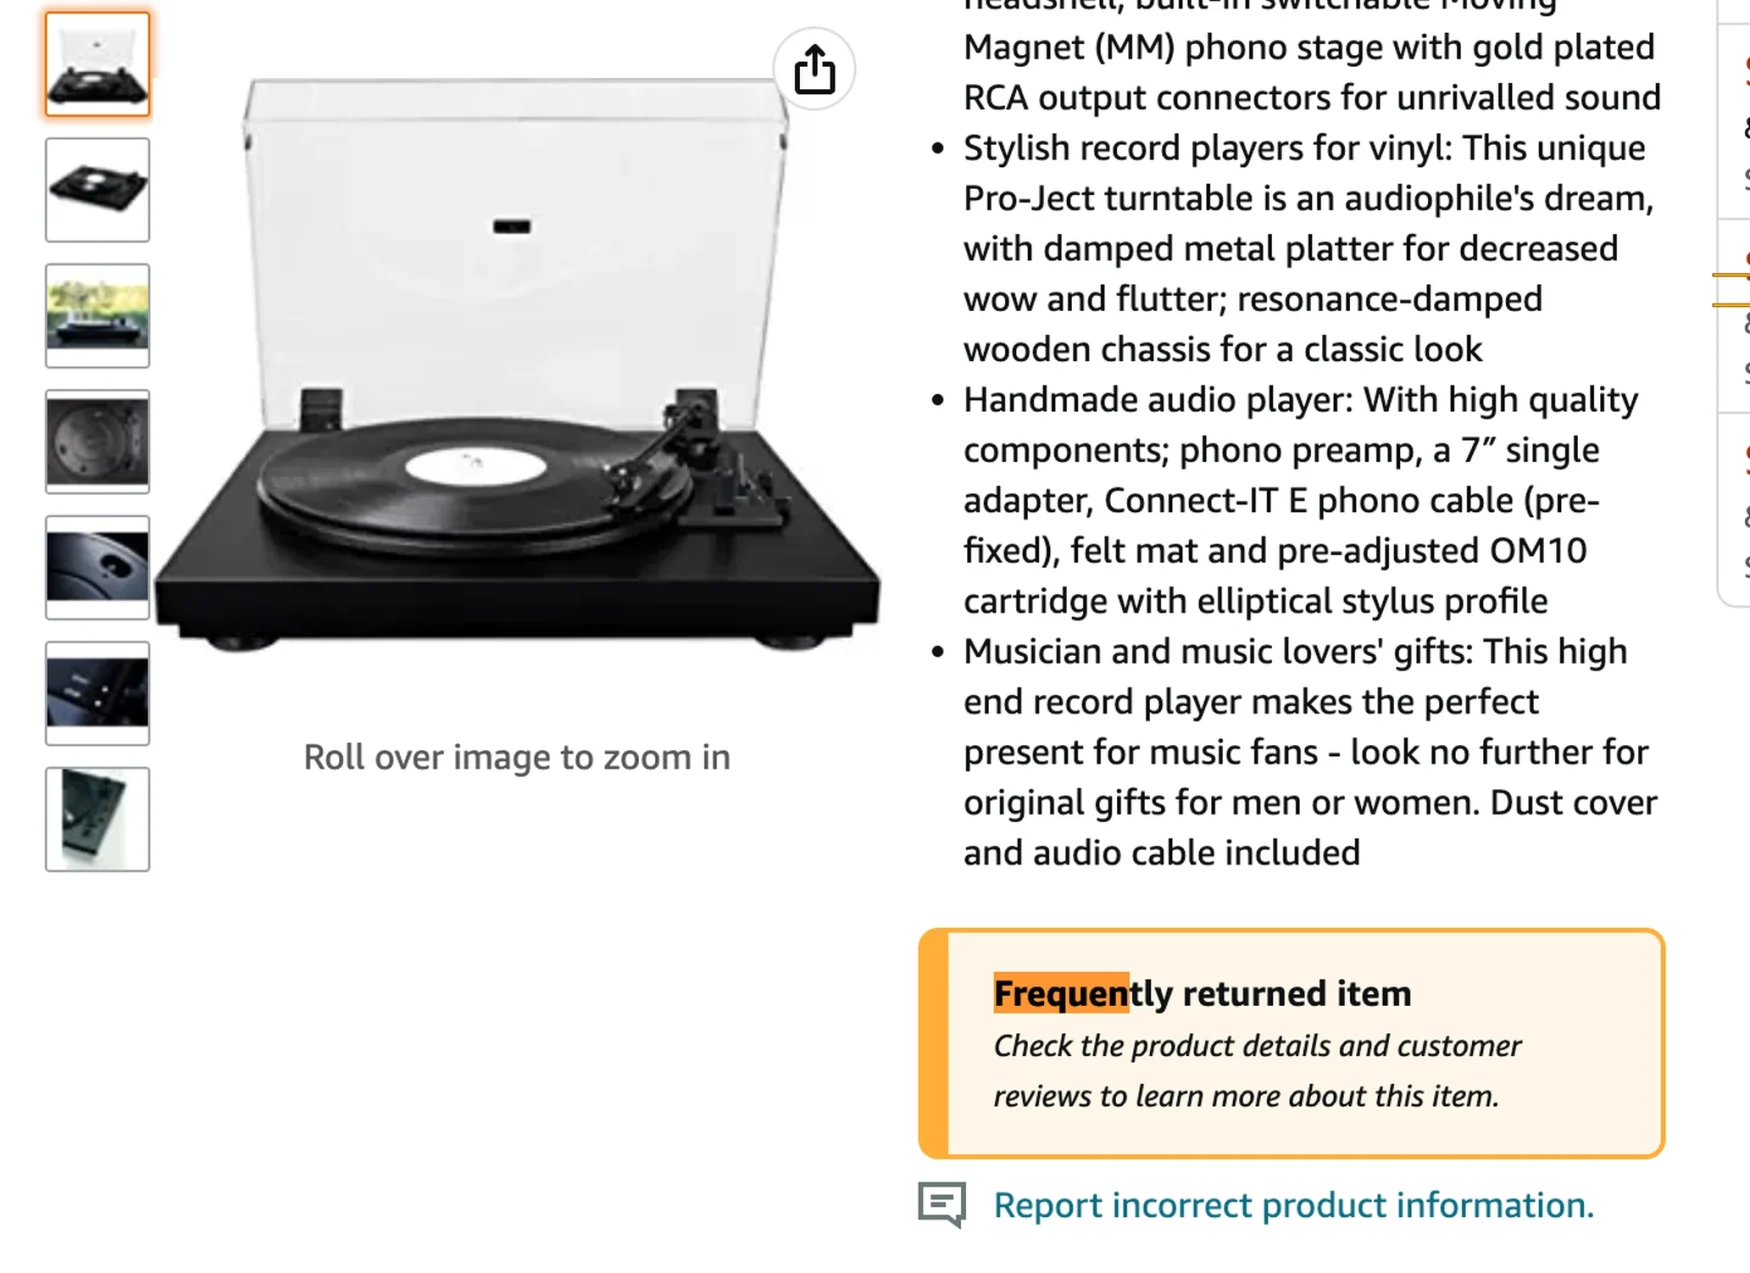 An Amazon product page for a record player with an orange and yellow 